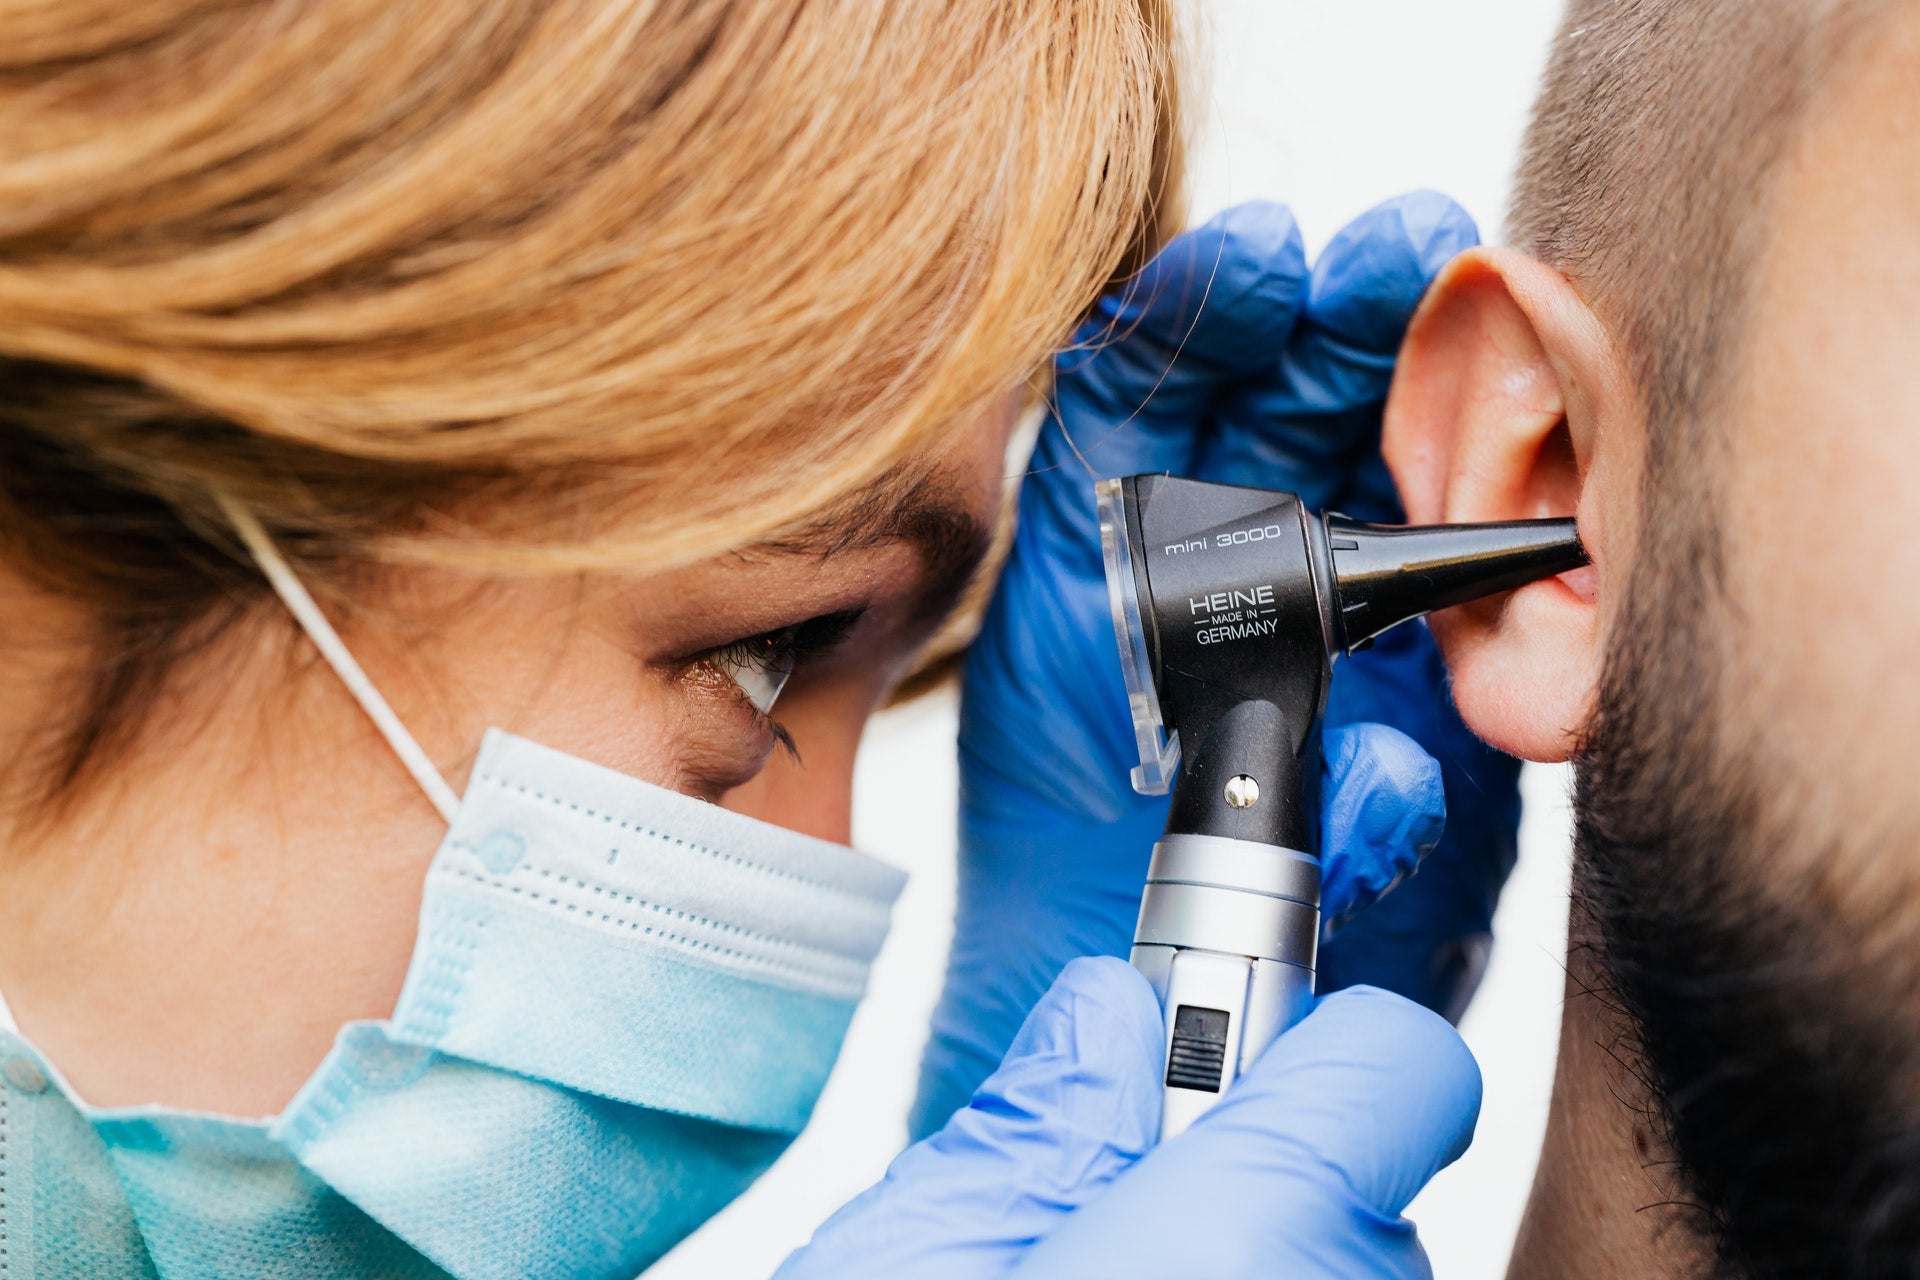 Tinnitus: An Epidemic That Other People Can’t Hear